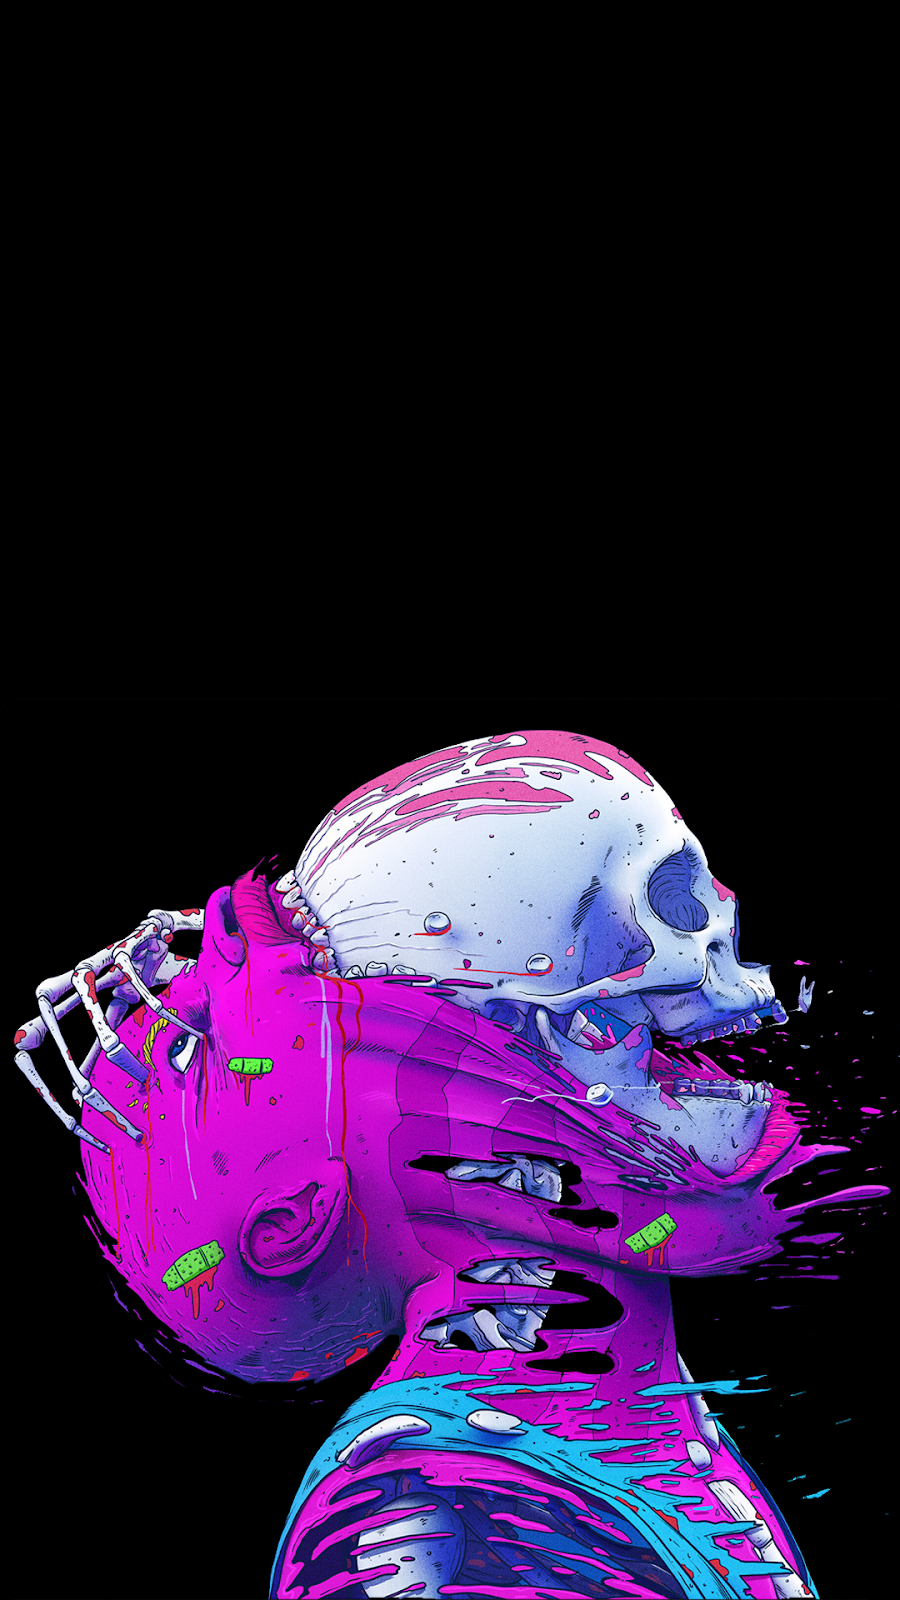 AMOLED PHONE WALLPAPER COLLECTION 122. Cool Wallpaper.cc. Skull wallpaper, Pop art wallpaper, Psychedelic art